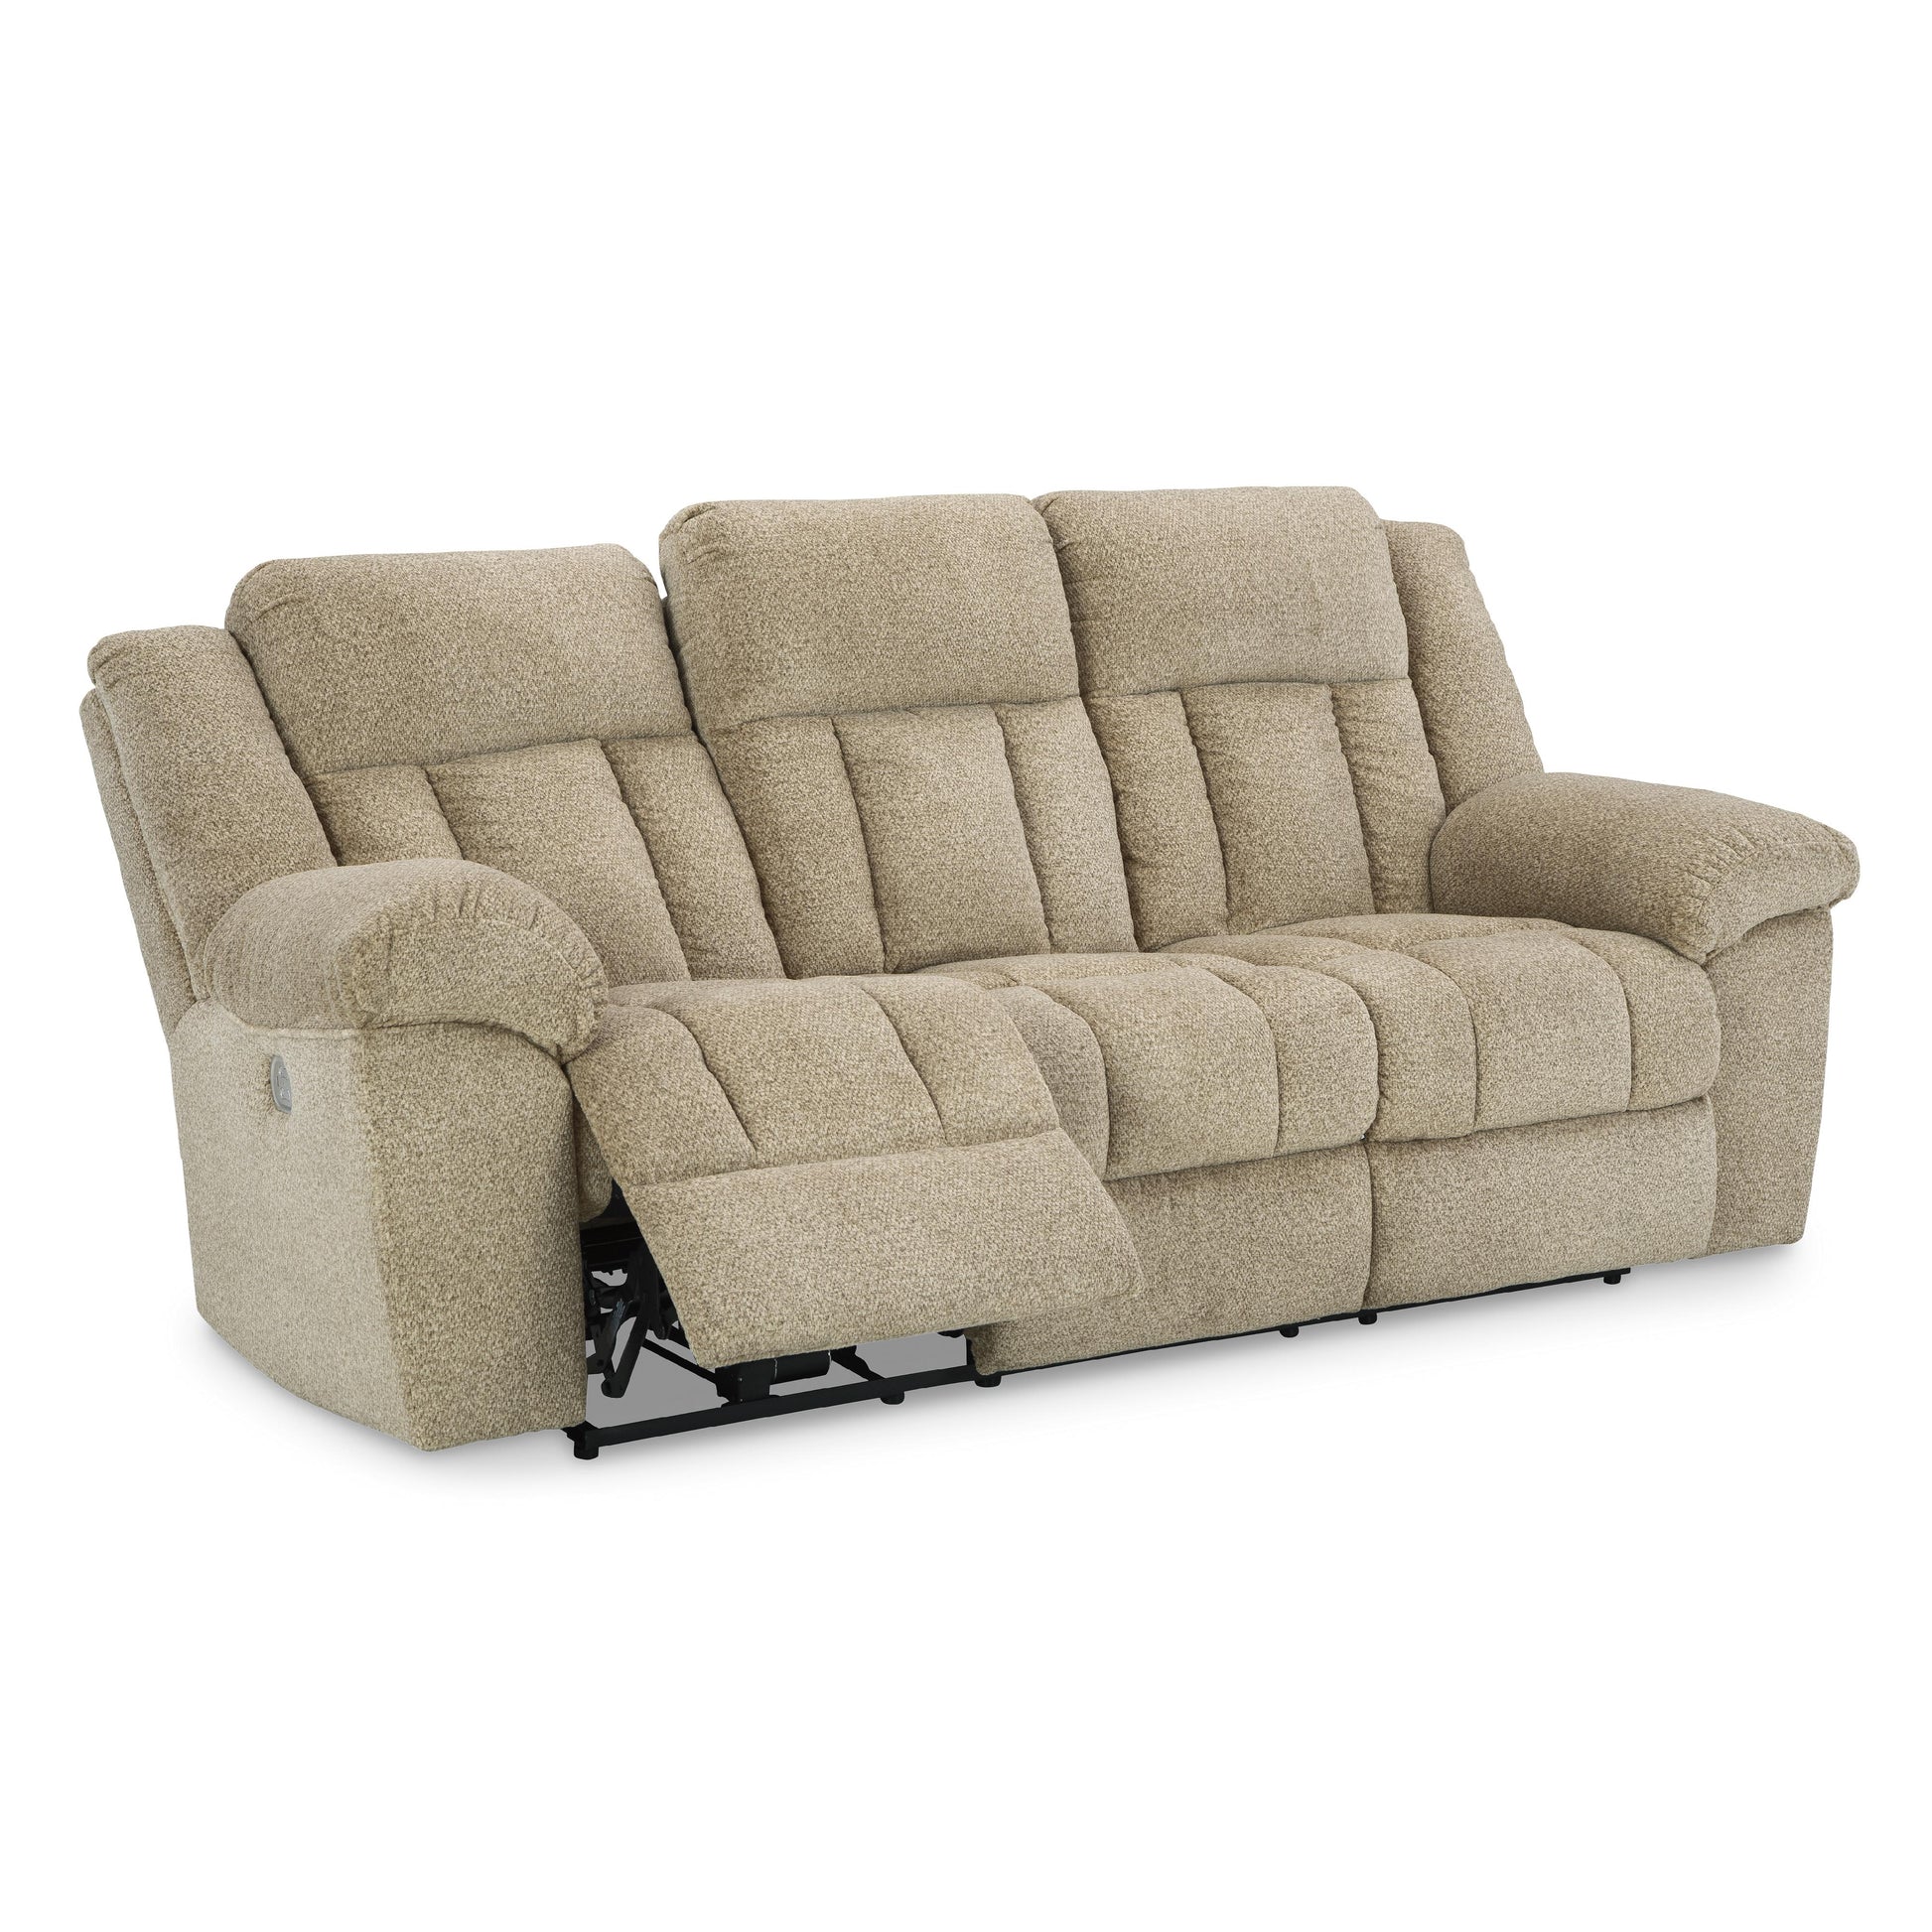 Signature Design by Ashley Tip-Off Power Reclining Sofa 6930515 IMAGE 2